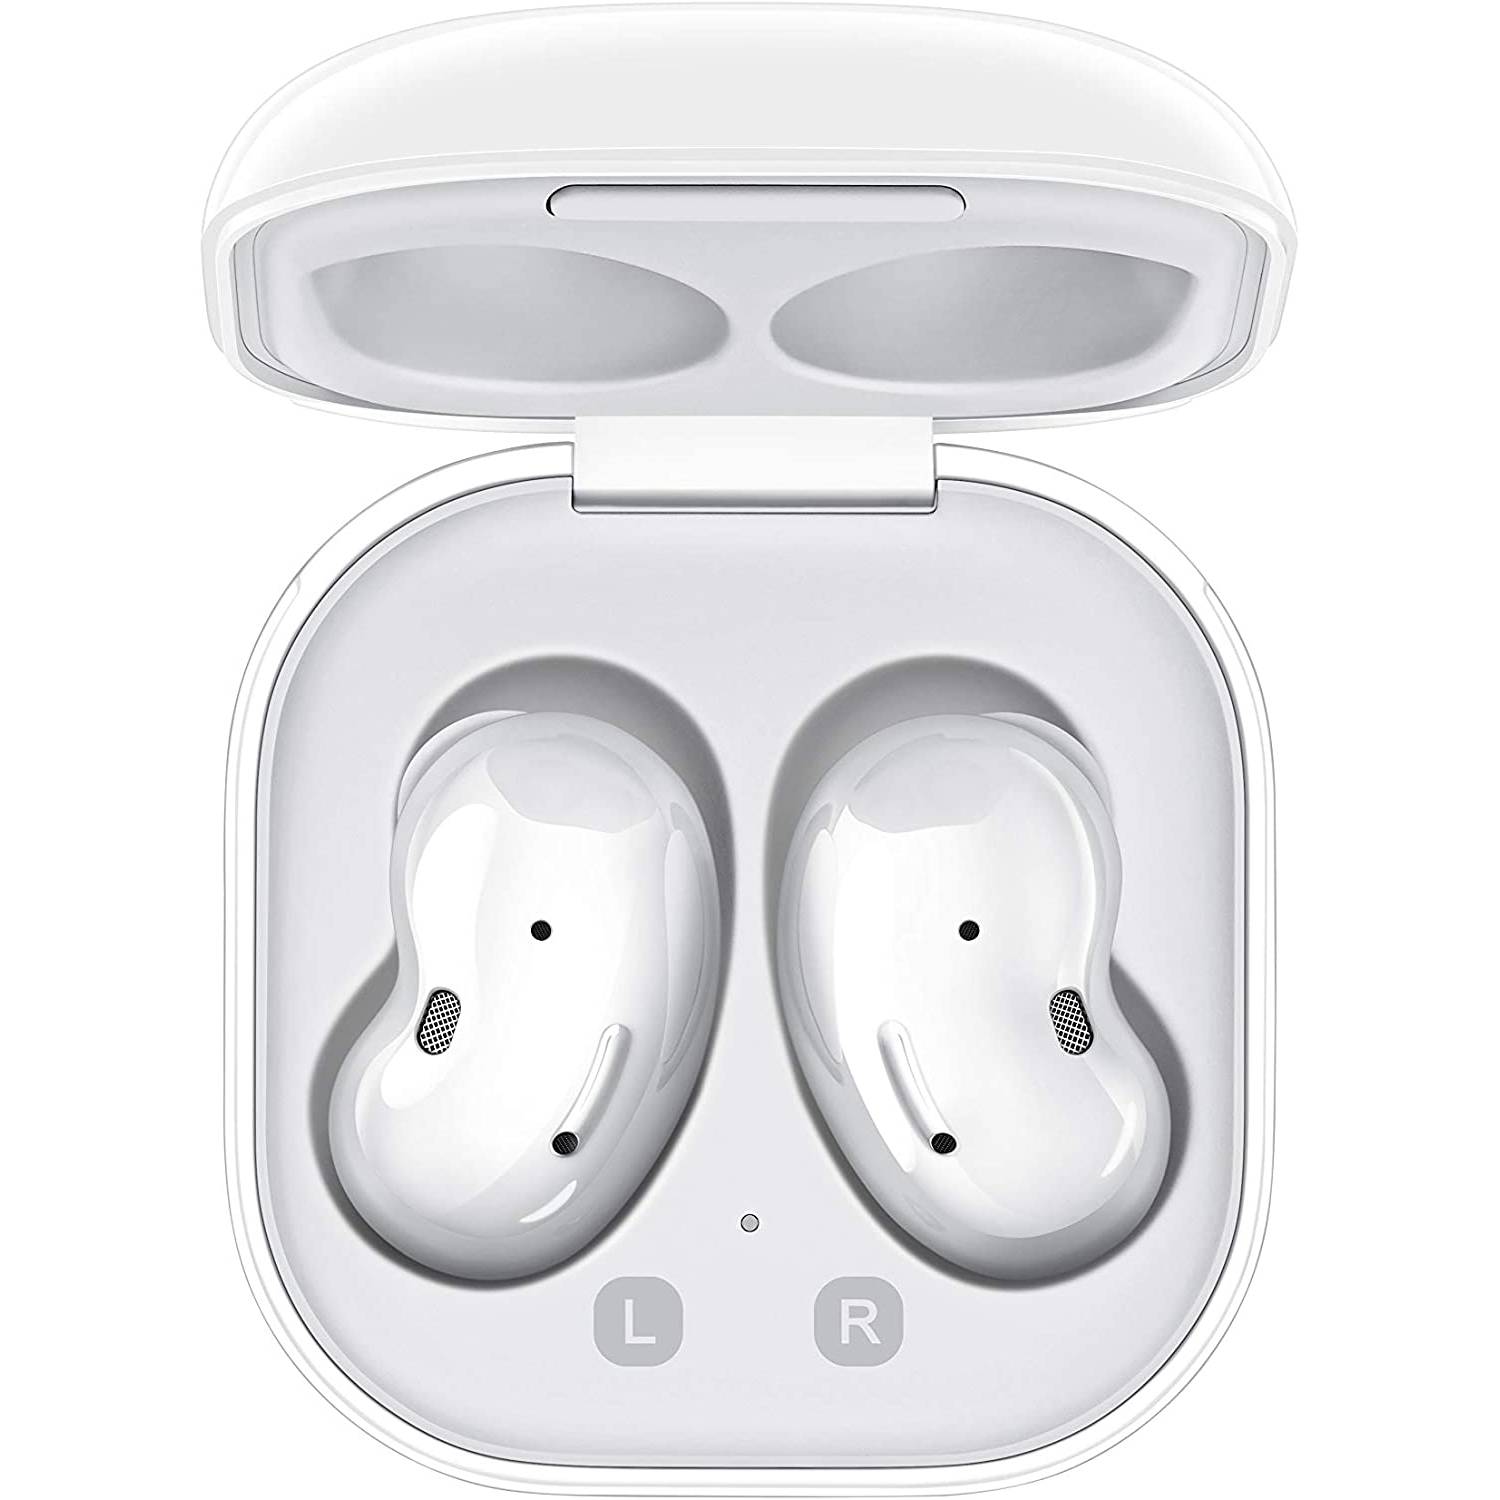  SAMSUNG Galaxy Buds Live True Wireless Bluetooth Earbuds w/  Active Noise Cancelling, Charging Case, AKG Tuned 12mm Speaker, Long  Battery Life, US Version, Mystic White : Electronics